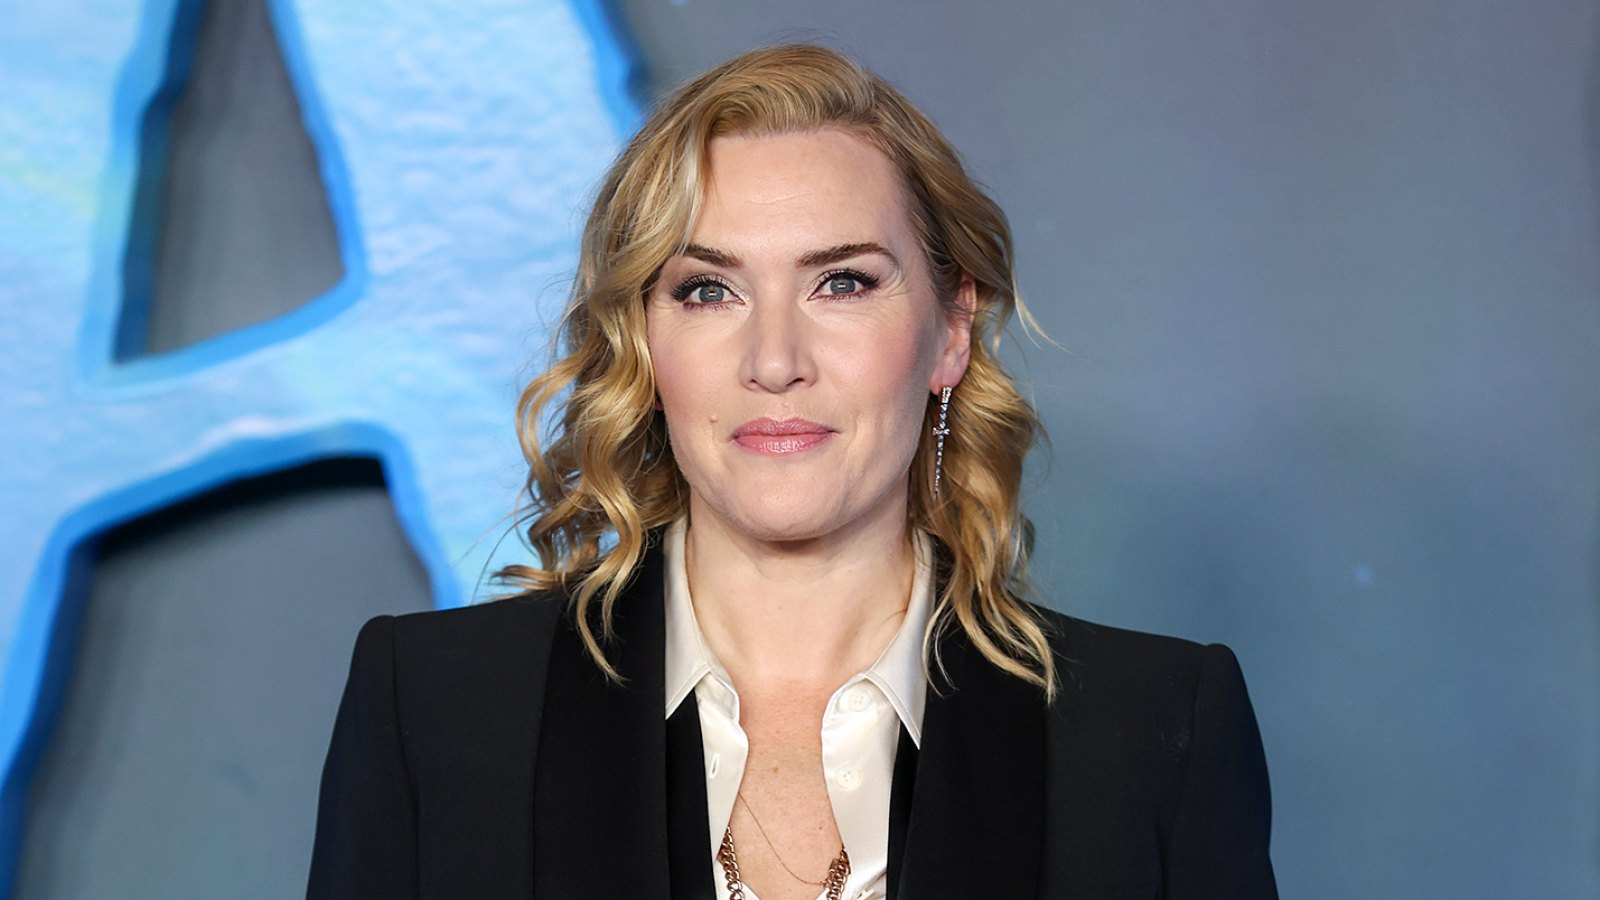 Kate Winslet Addresses 'Scrutiny' and Bullying She Endured in Her 20s Over Her Weight